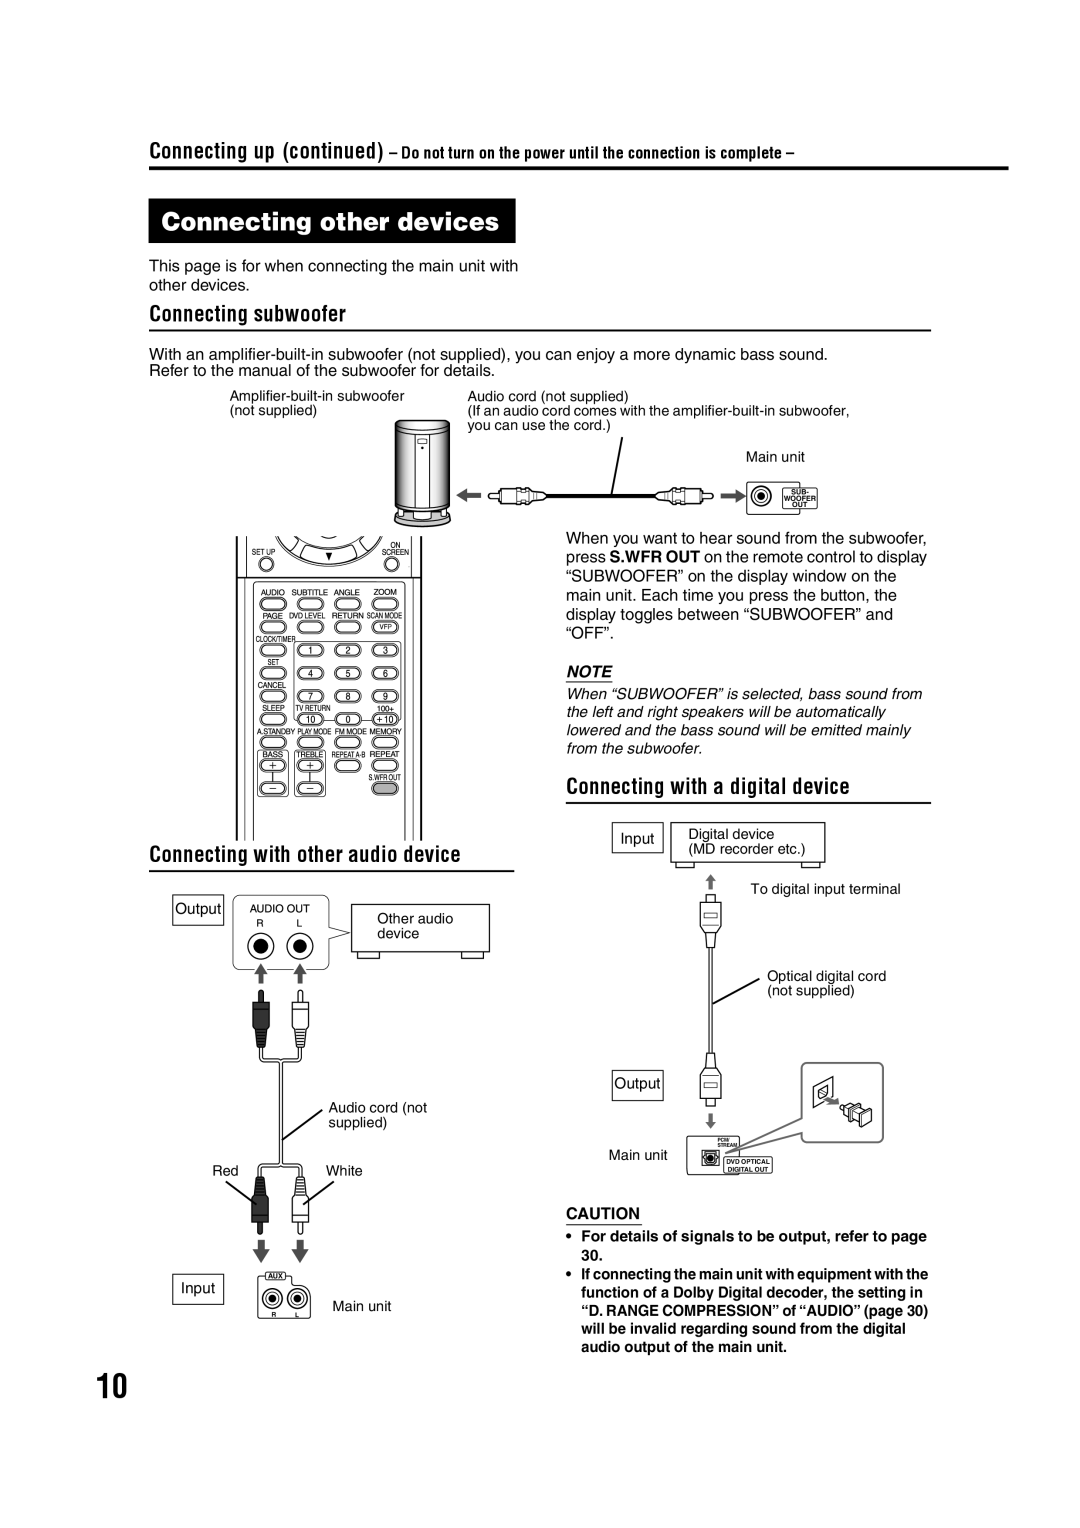 JVC GVT0144-005A manual Connecting other devices, Connecting subwoofer, Connecting with a digital device, Connection 